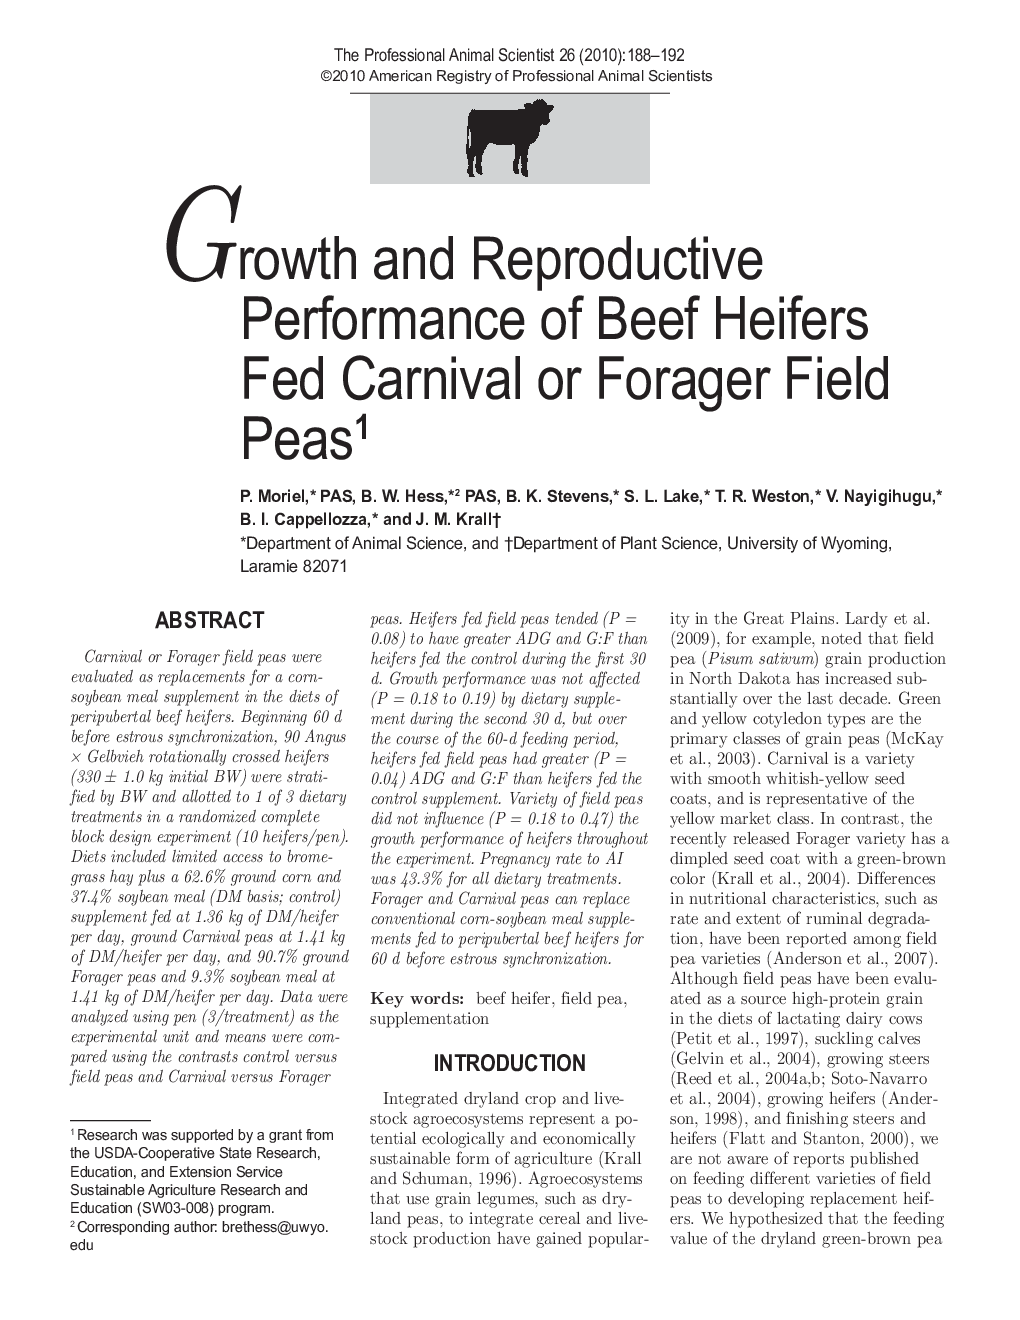 Growth and Reproductive Performance of Beef Heifers Fed Carnival or Forager Field Peas
1
